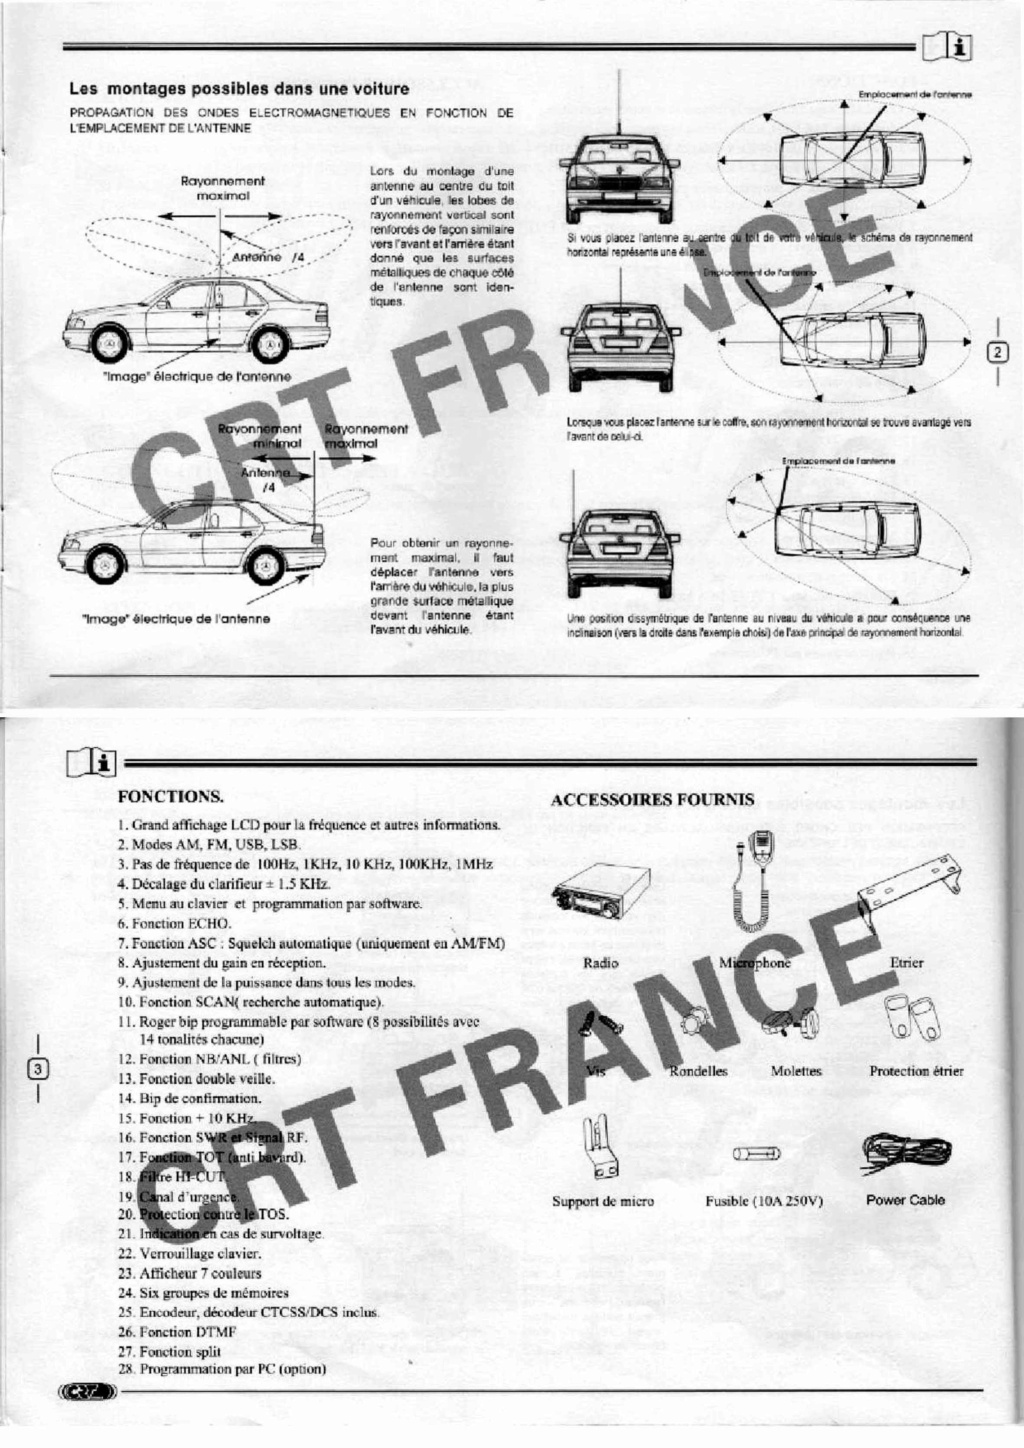 CRT SS 9900 v4 (Mobile) - Page 17 Feuill13